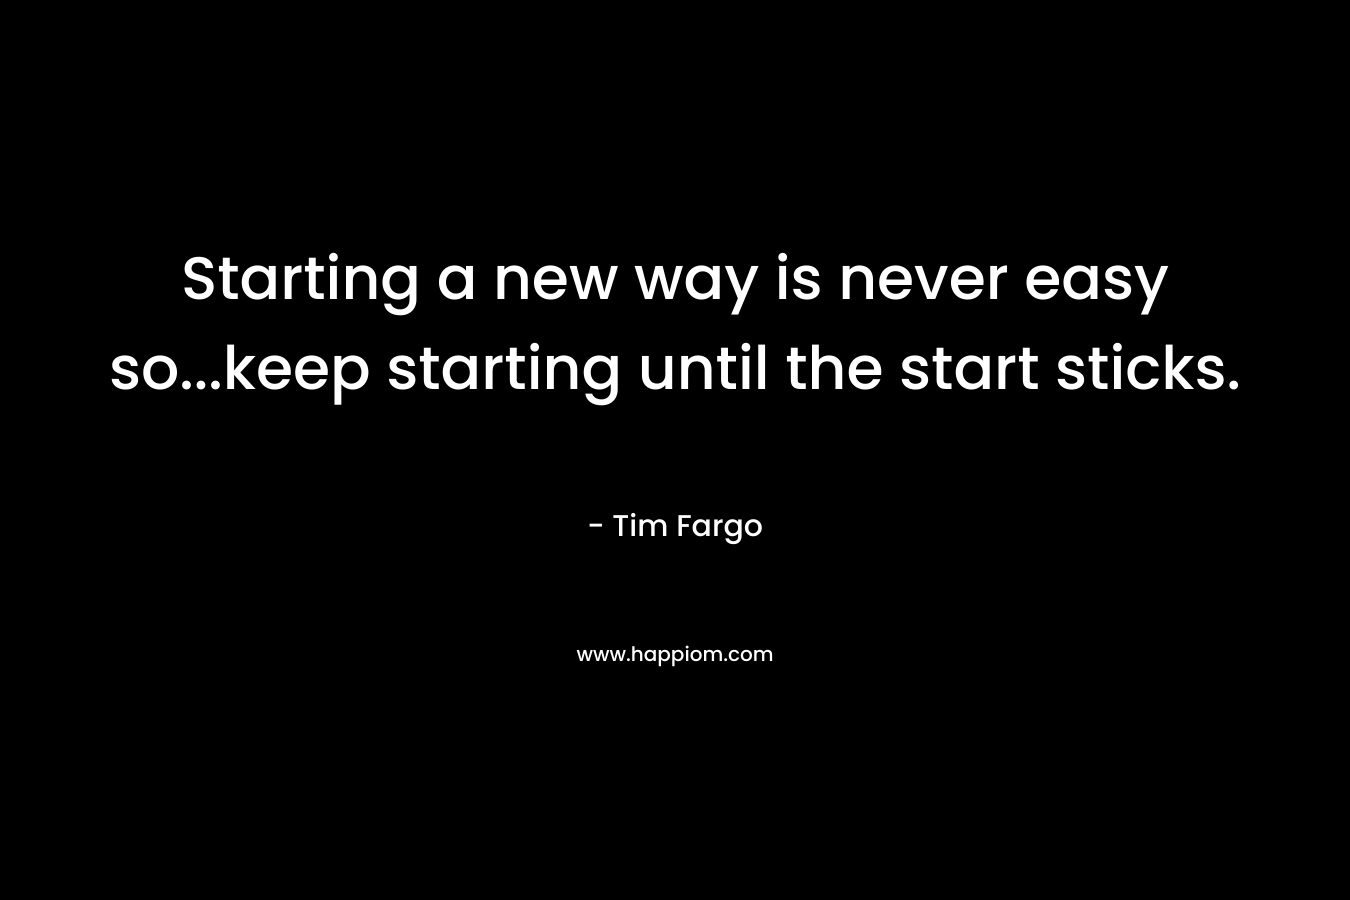 Starting a new way is never easy so...keep starting until the start sticks.